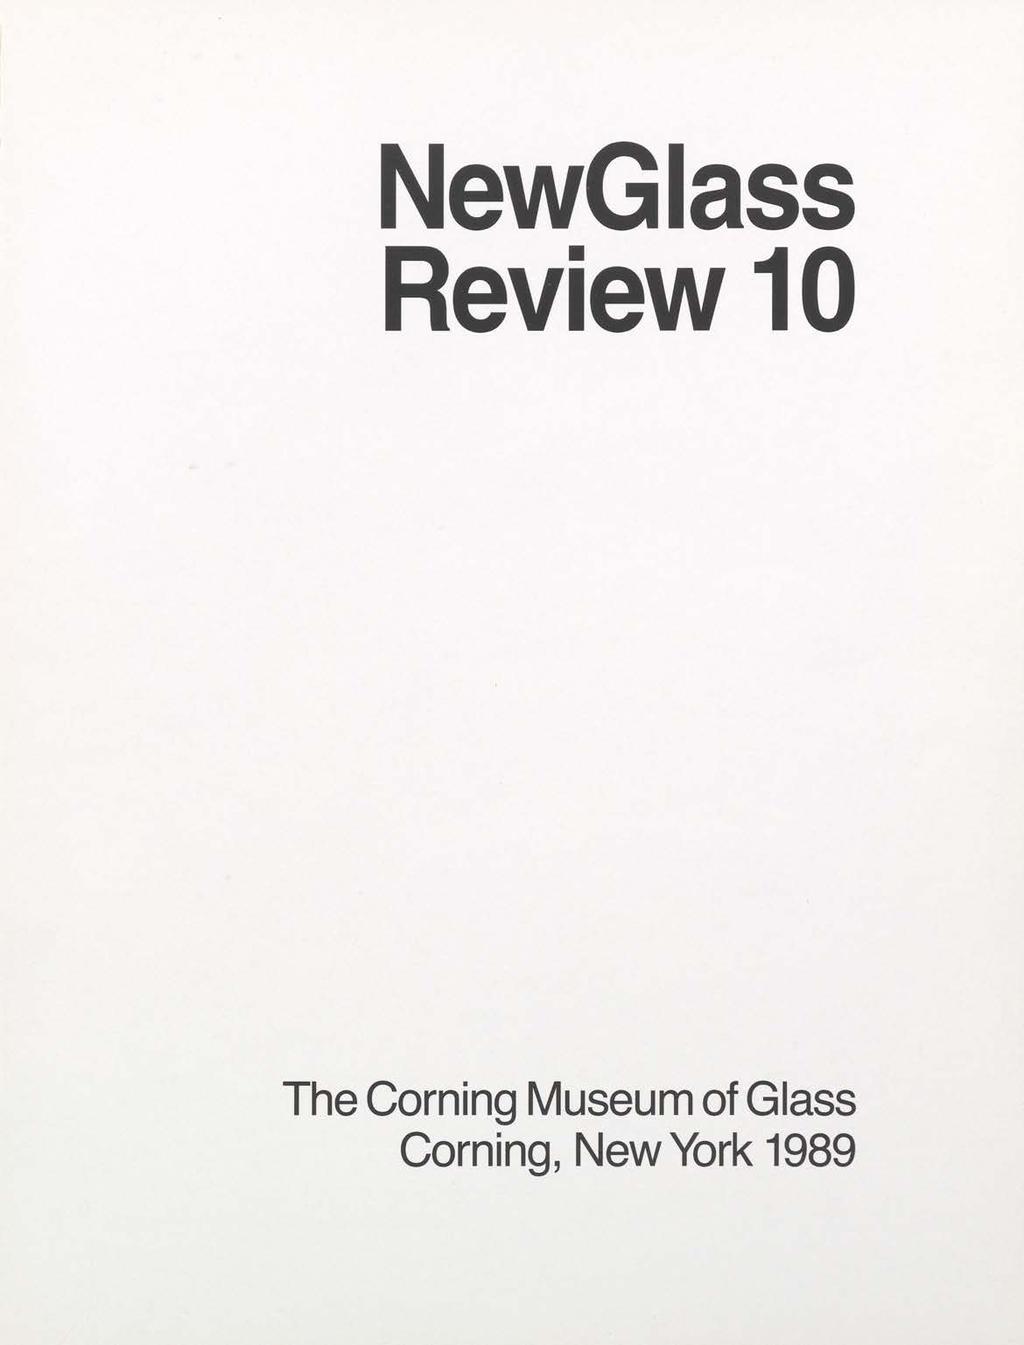 NewG lass Review 10 The Corning